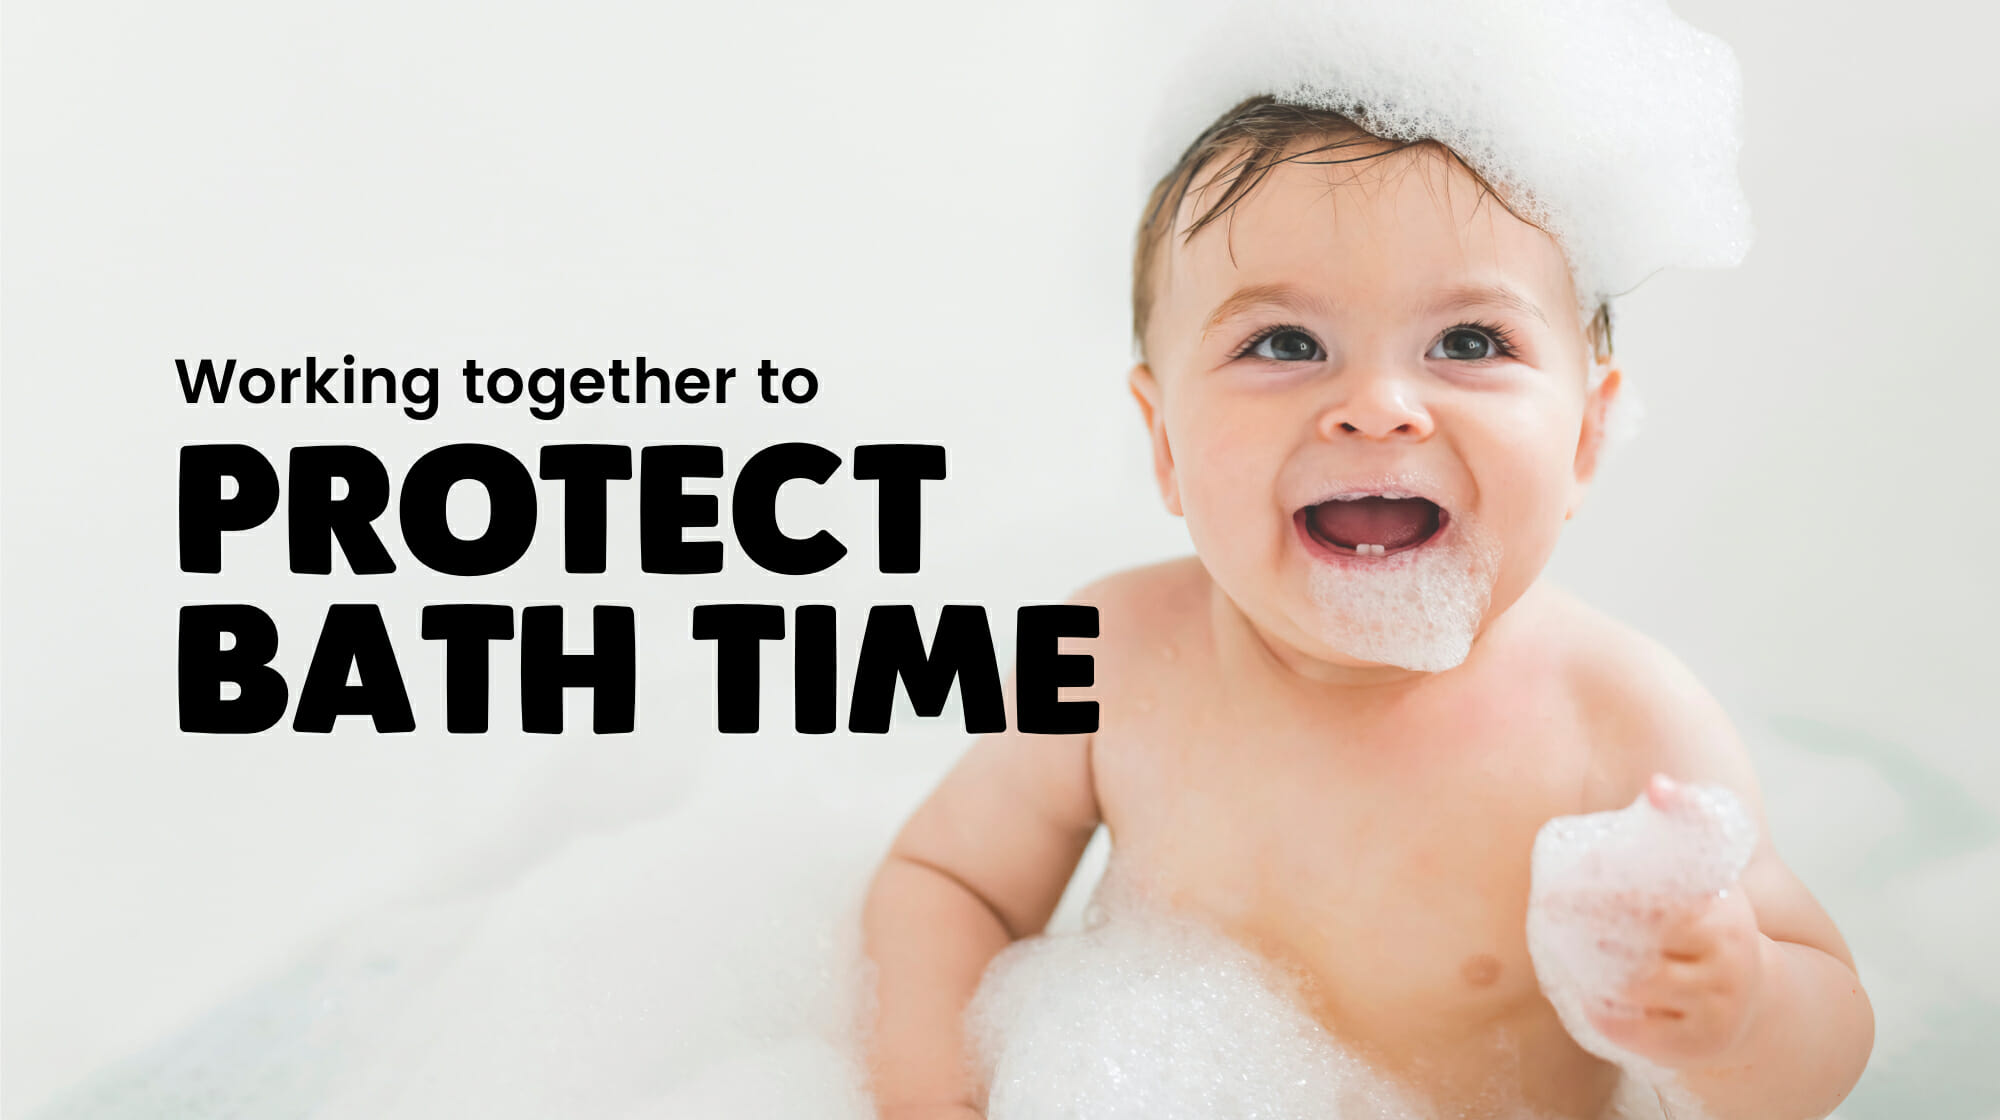 Fuel Bank Foundation teams up with Johnson & Johnson to help protect bath time Featured Image